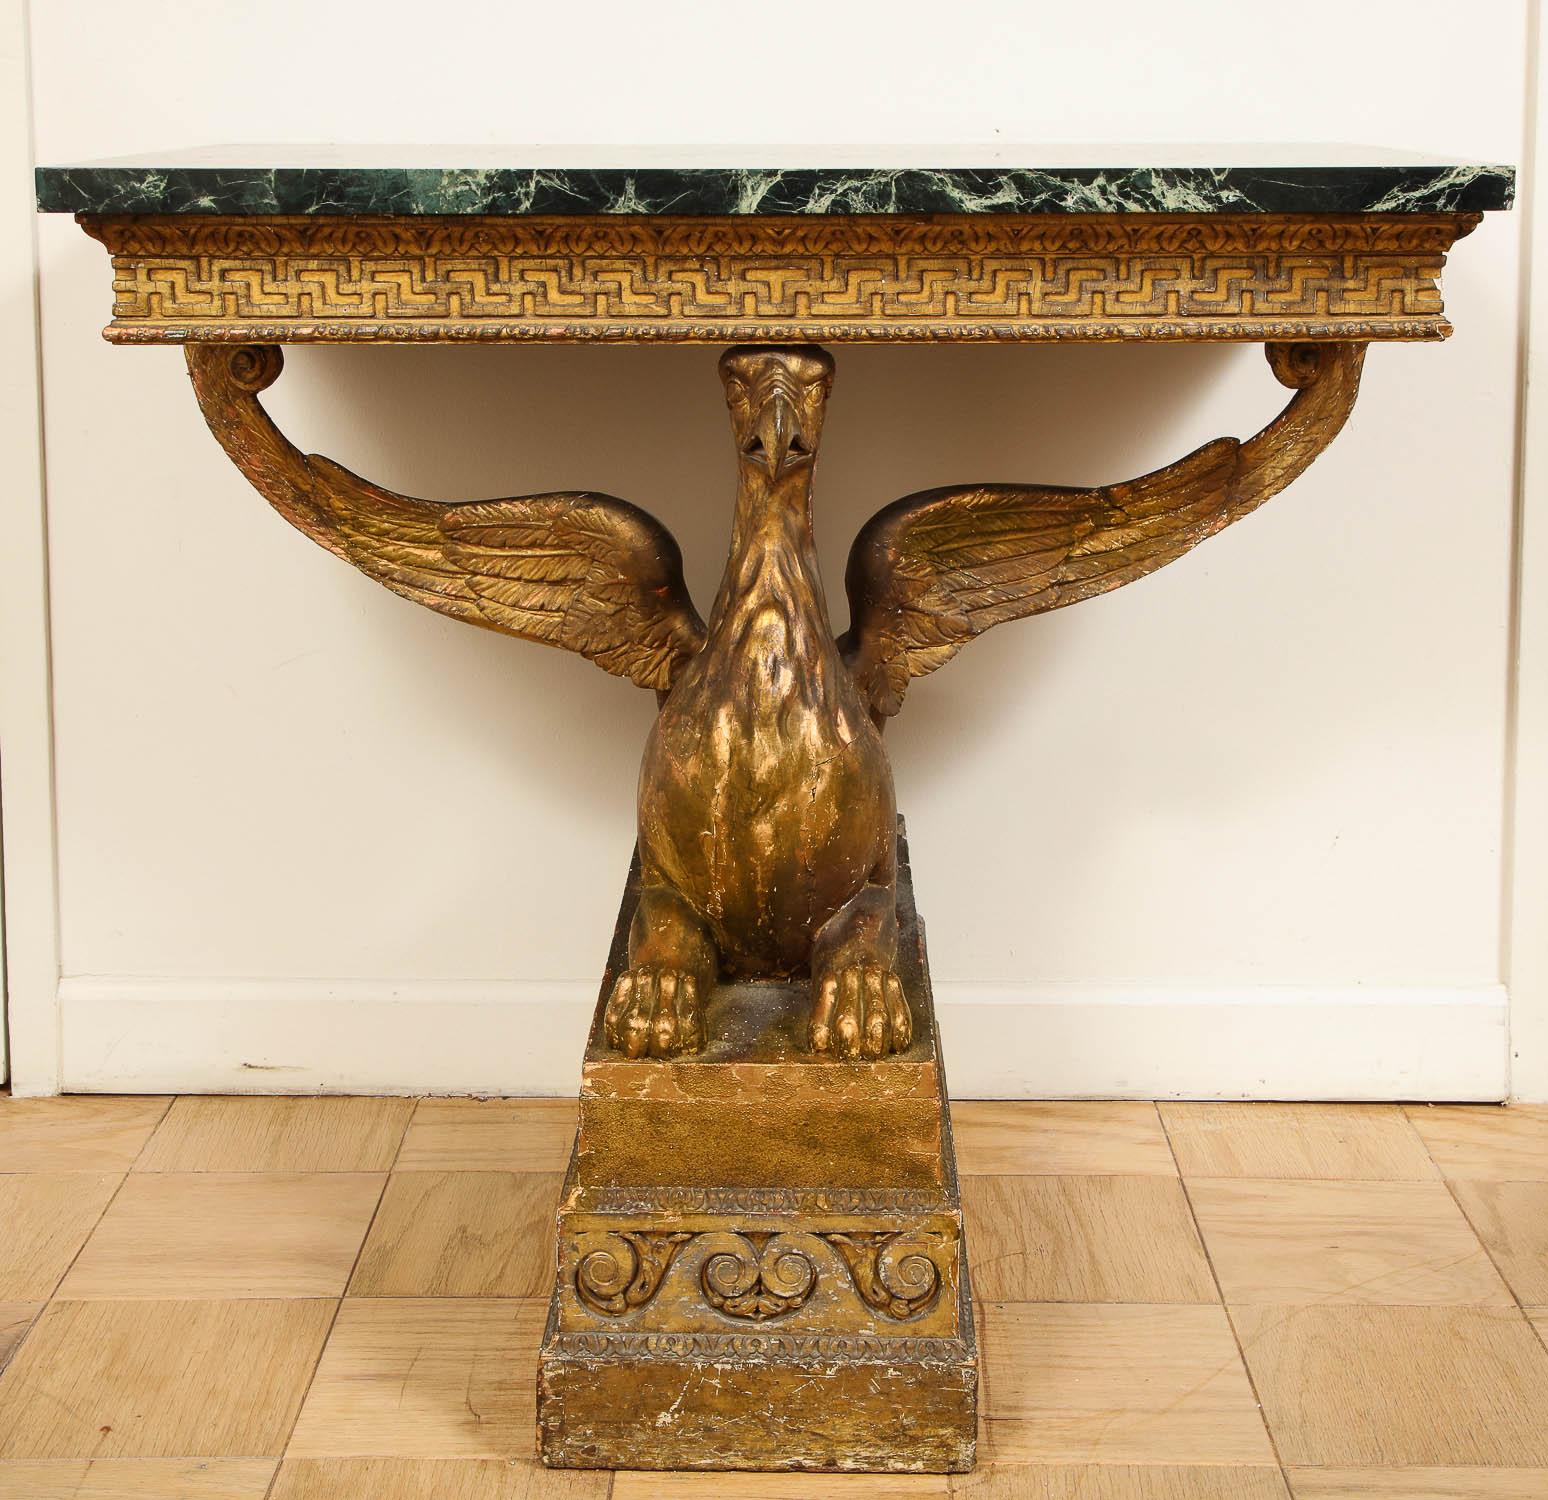 An Important pair of mid-18th century George II giltwood griffin console tables with rectangular Verde Antico marble tops. The magnificent pair of mid-18th century George II giltwood griffin console tables have rectangular Verde Antico marble tops